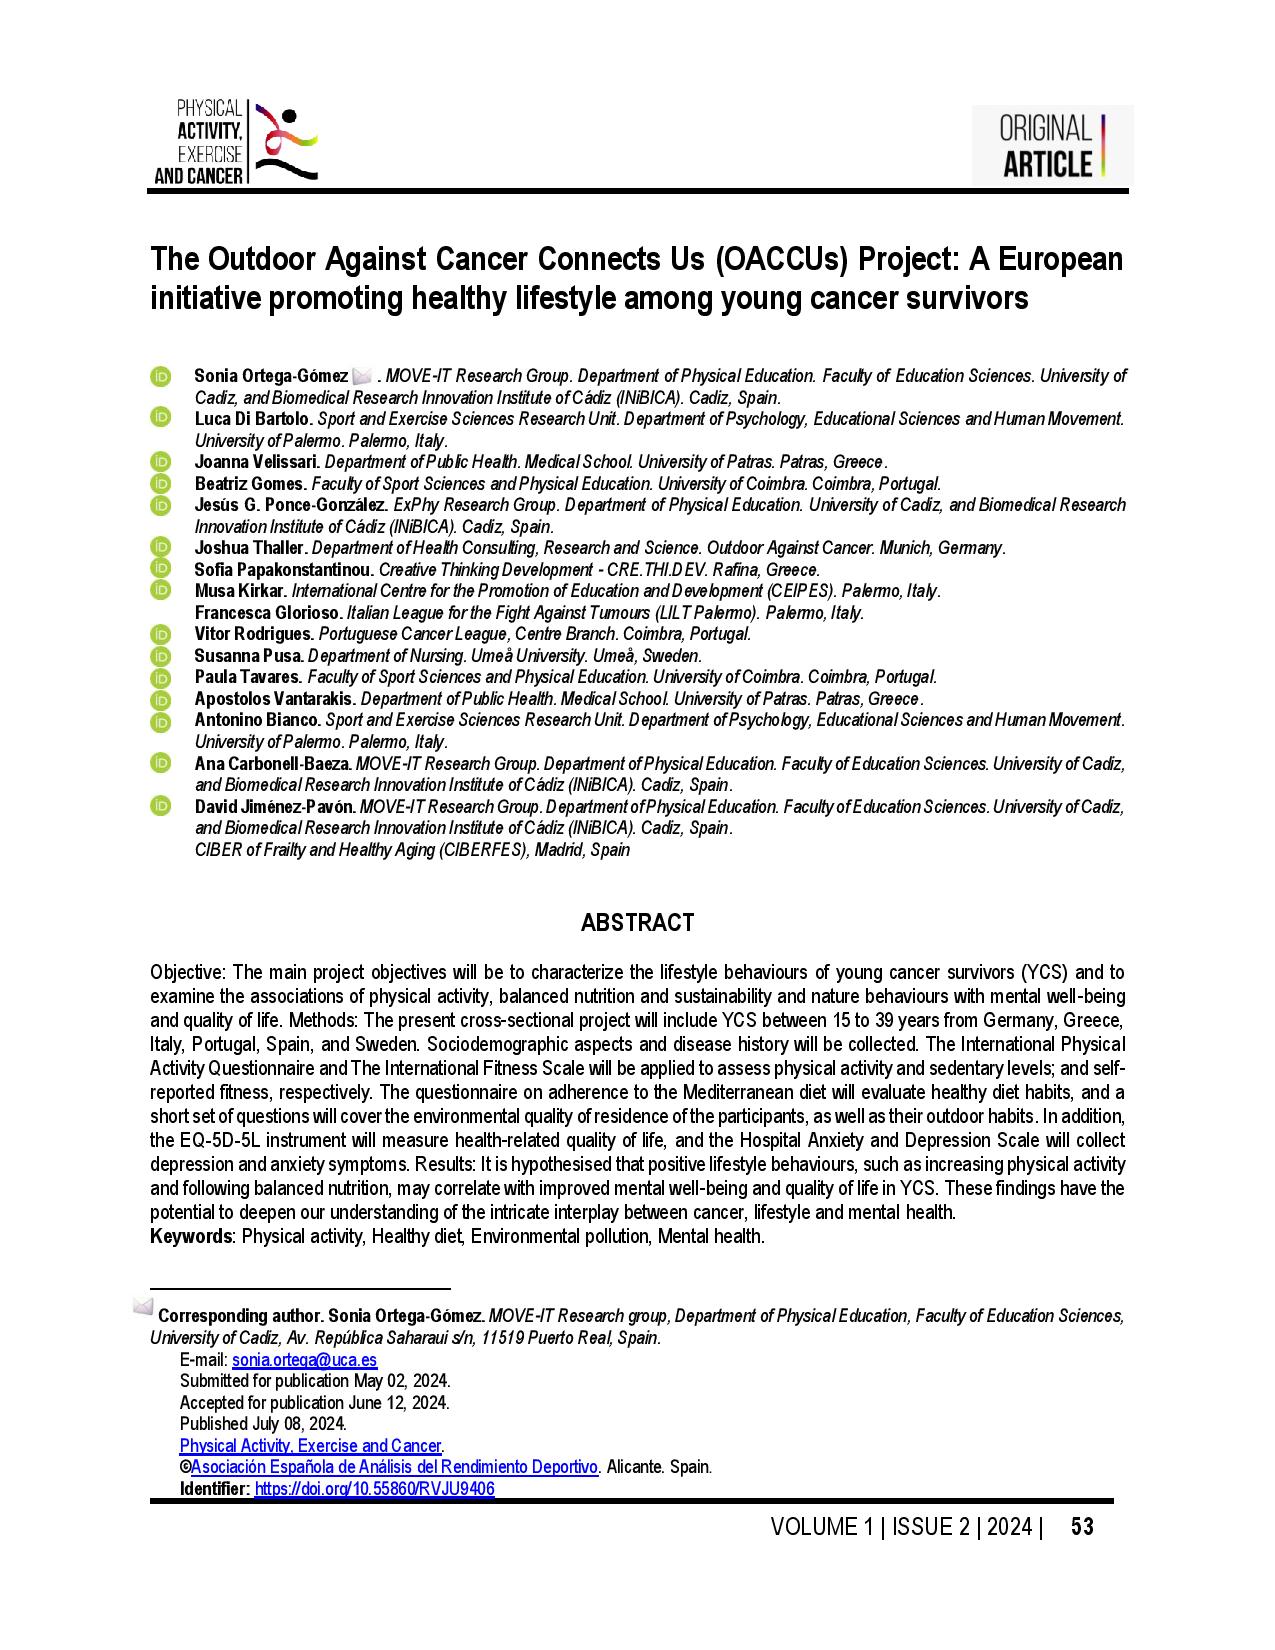 The Outdoor Against Cancer Connects Us (OACCUs) Project: A European initiative promoting healthy lifestyle among young cancer survivors